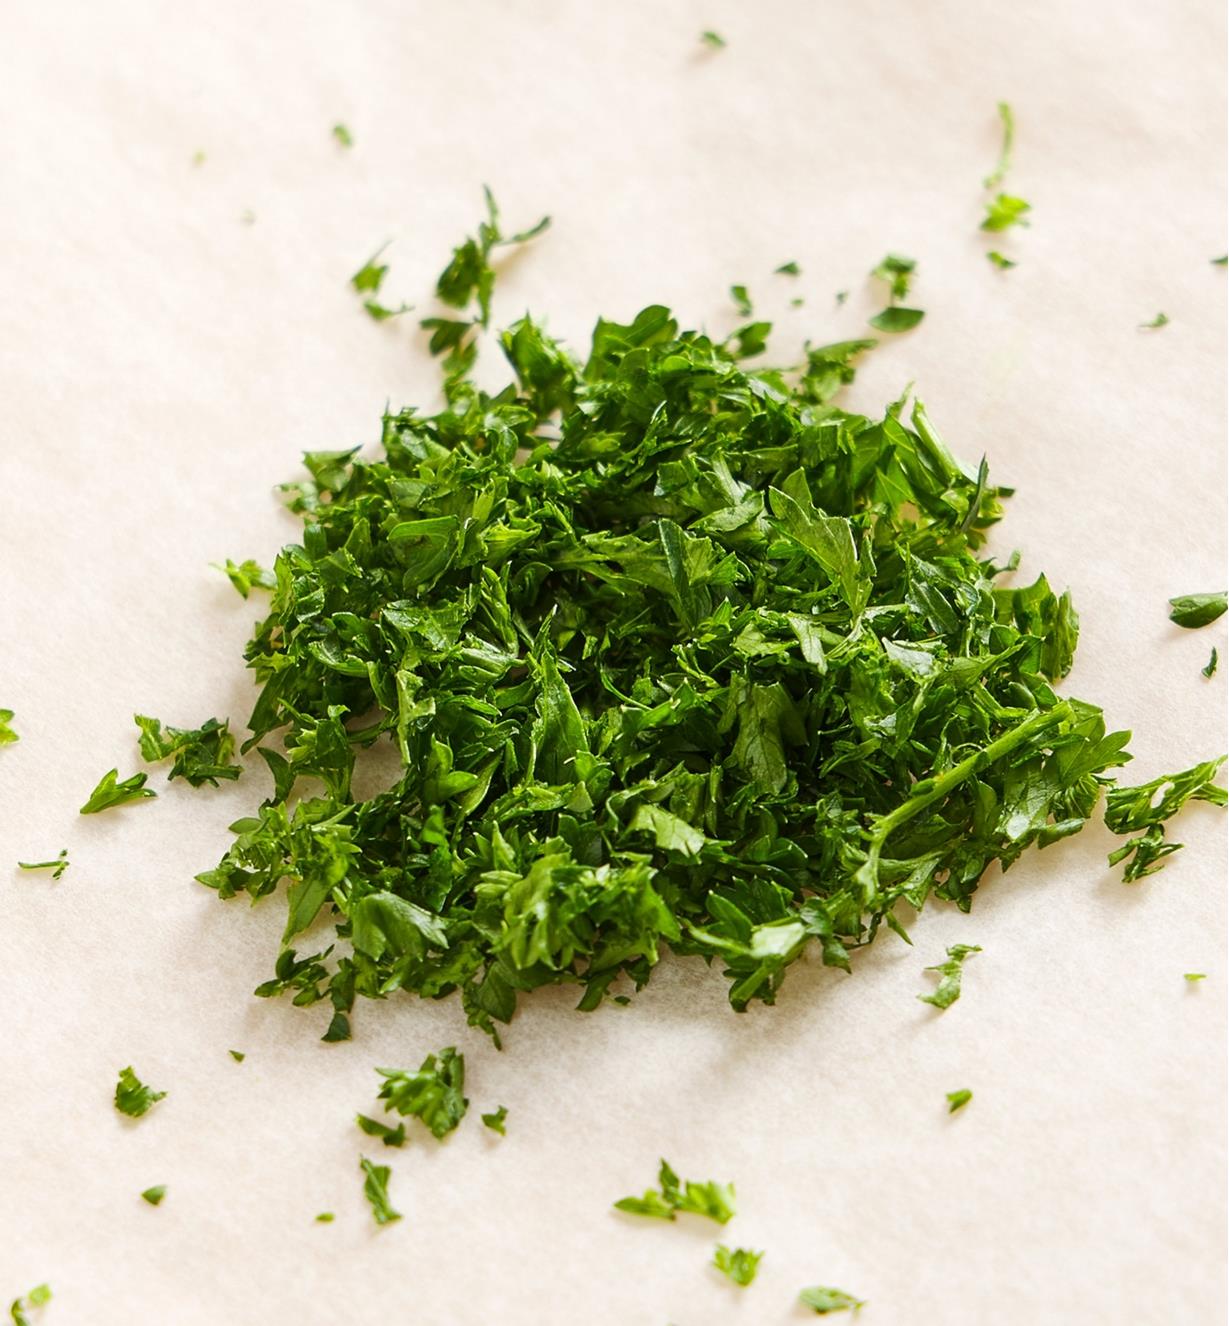 A pile of finely chopped herbs